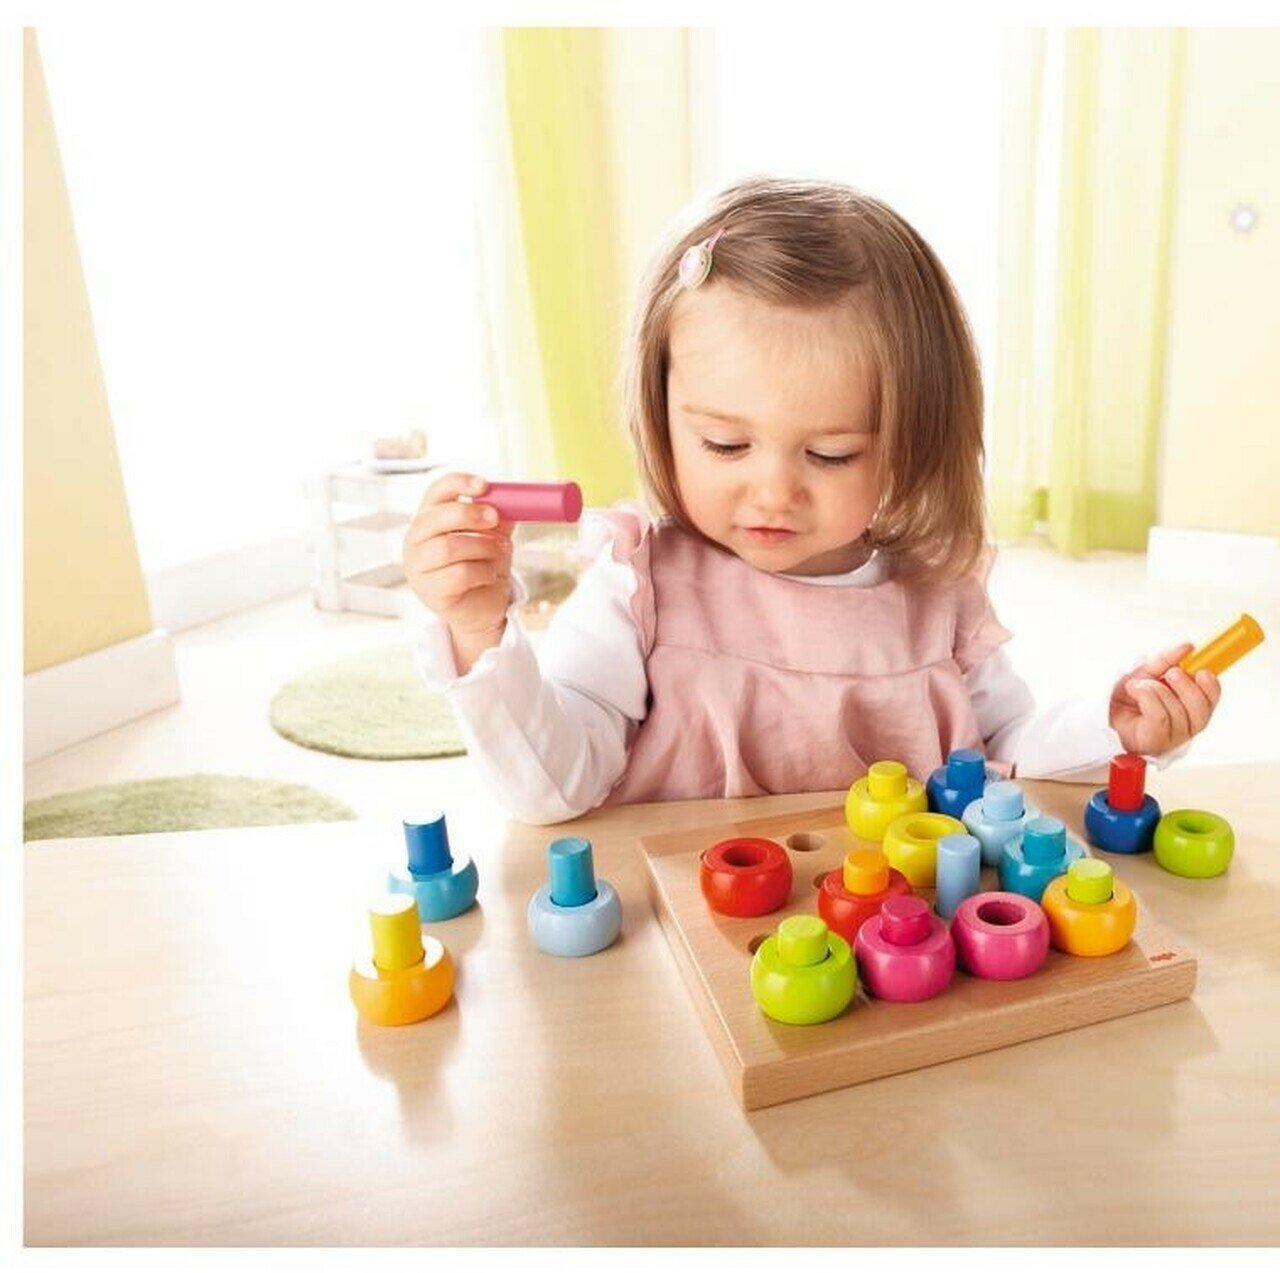 HABA Rainbow Whirls Pegging Game - Wood Wood Toys Canada's Favourite Montessori Toy Store